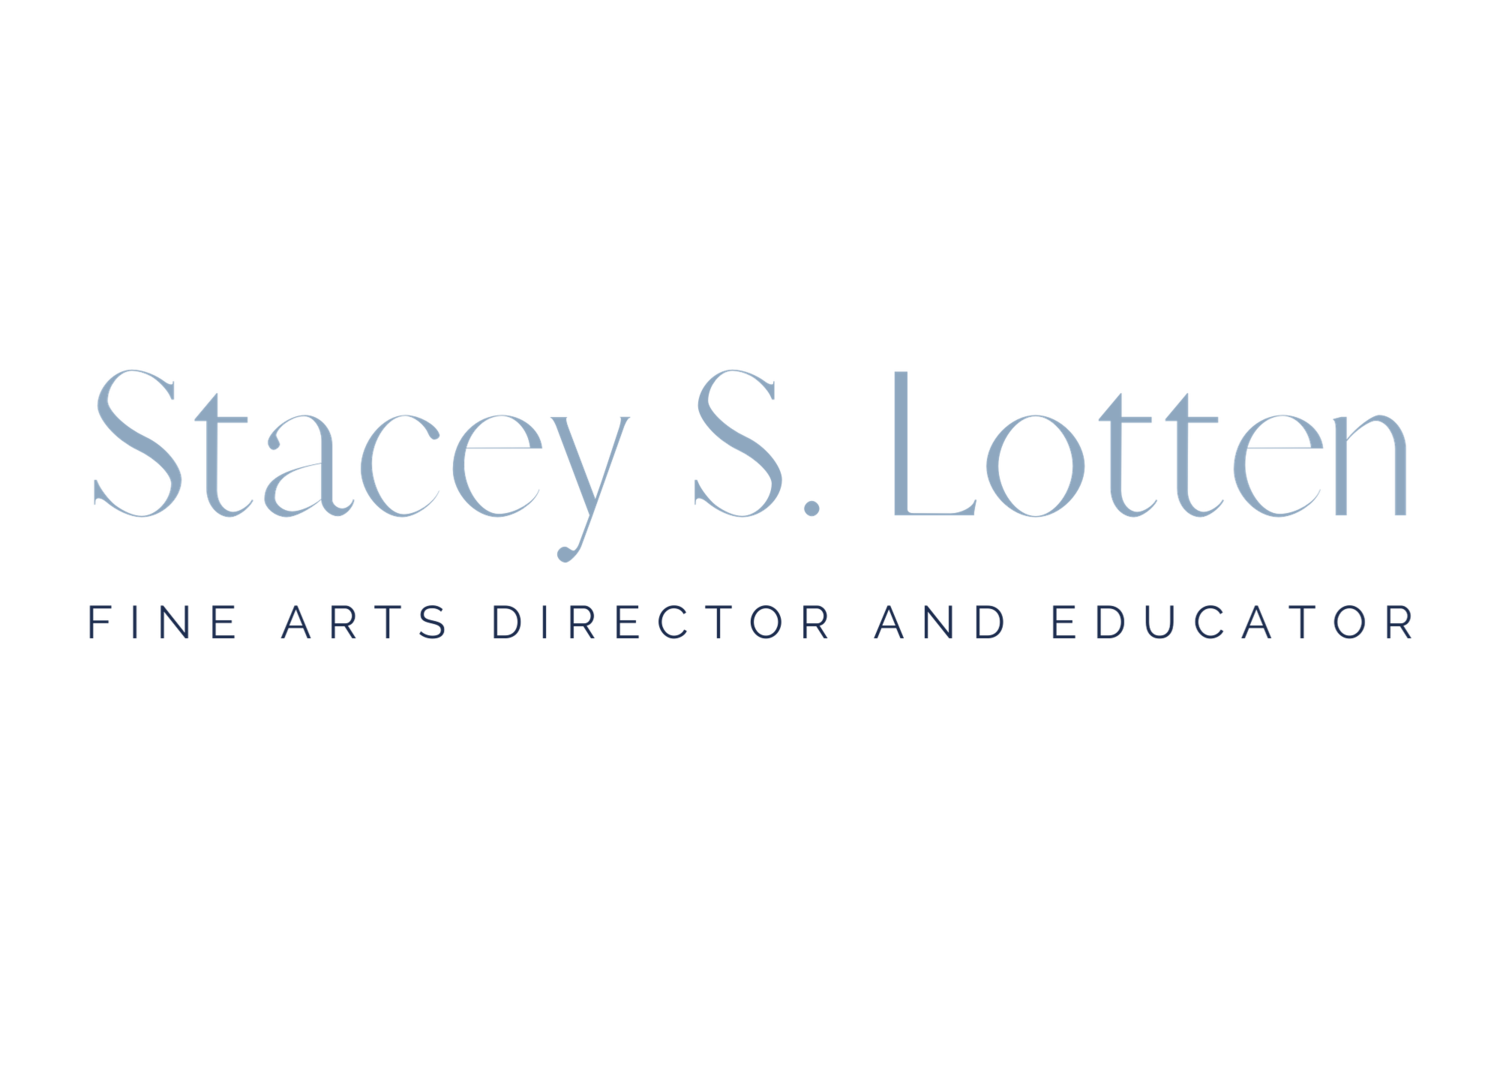 Stacey S. Lotten